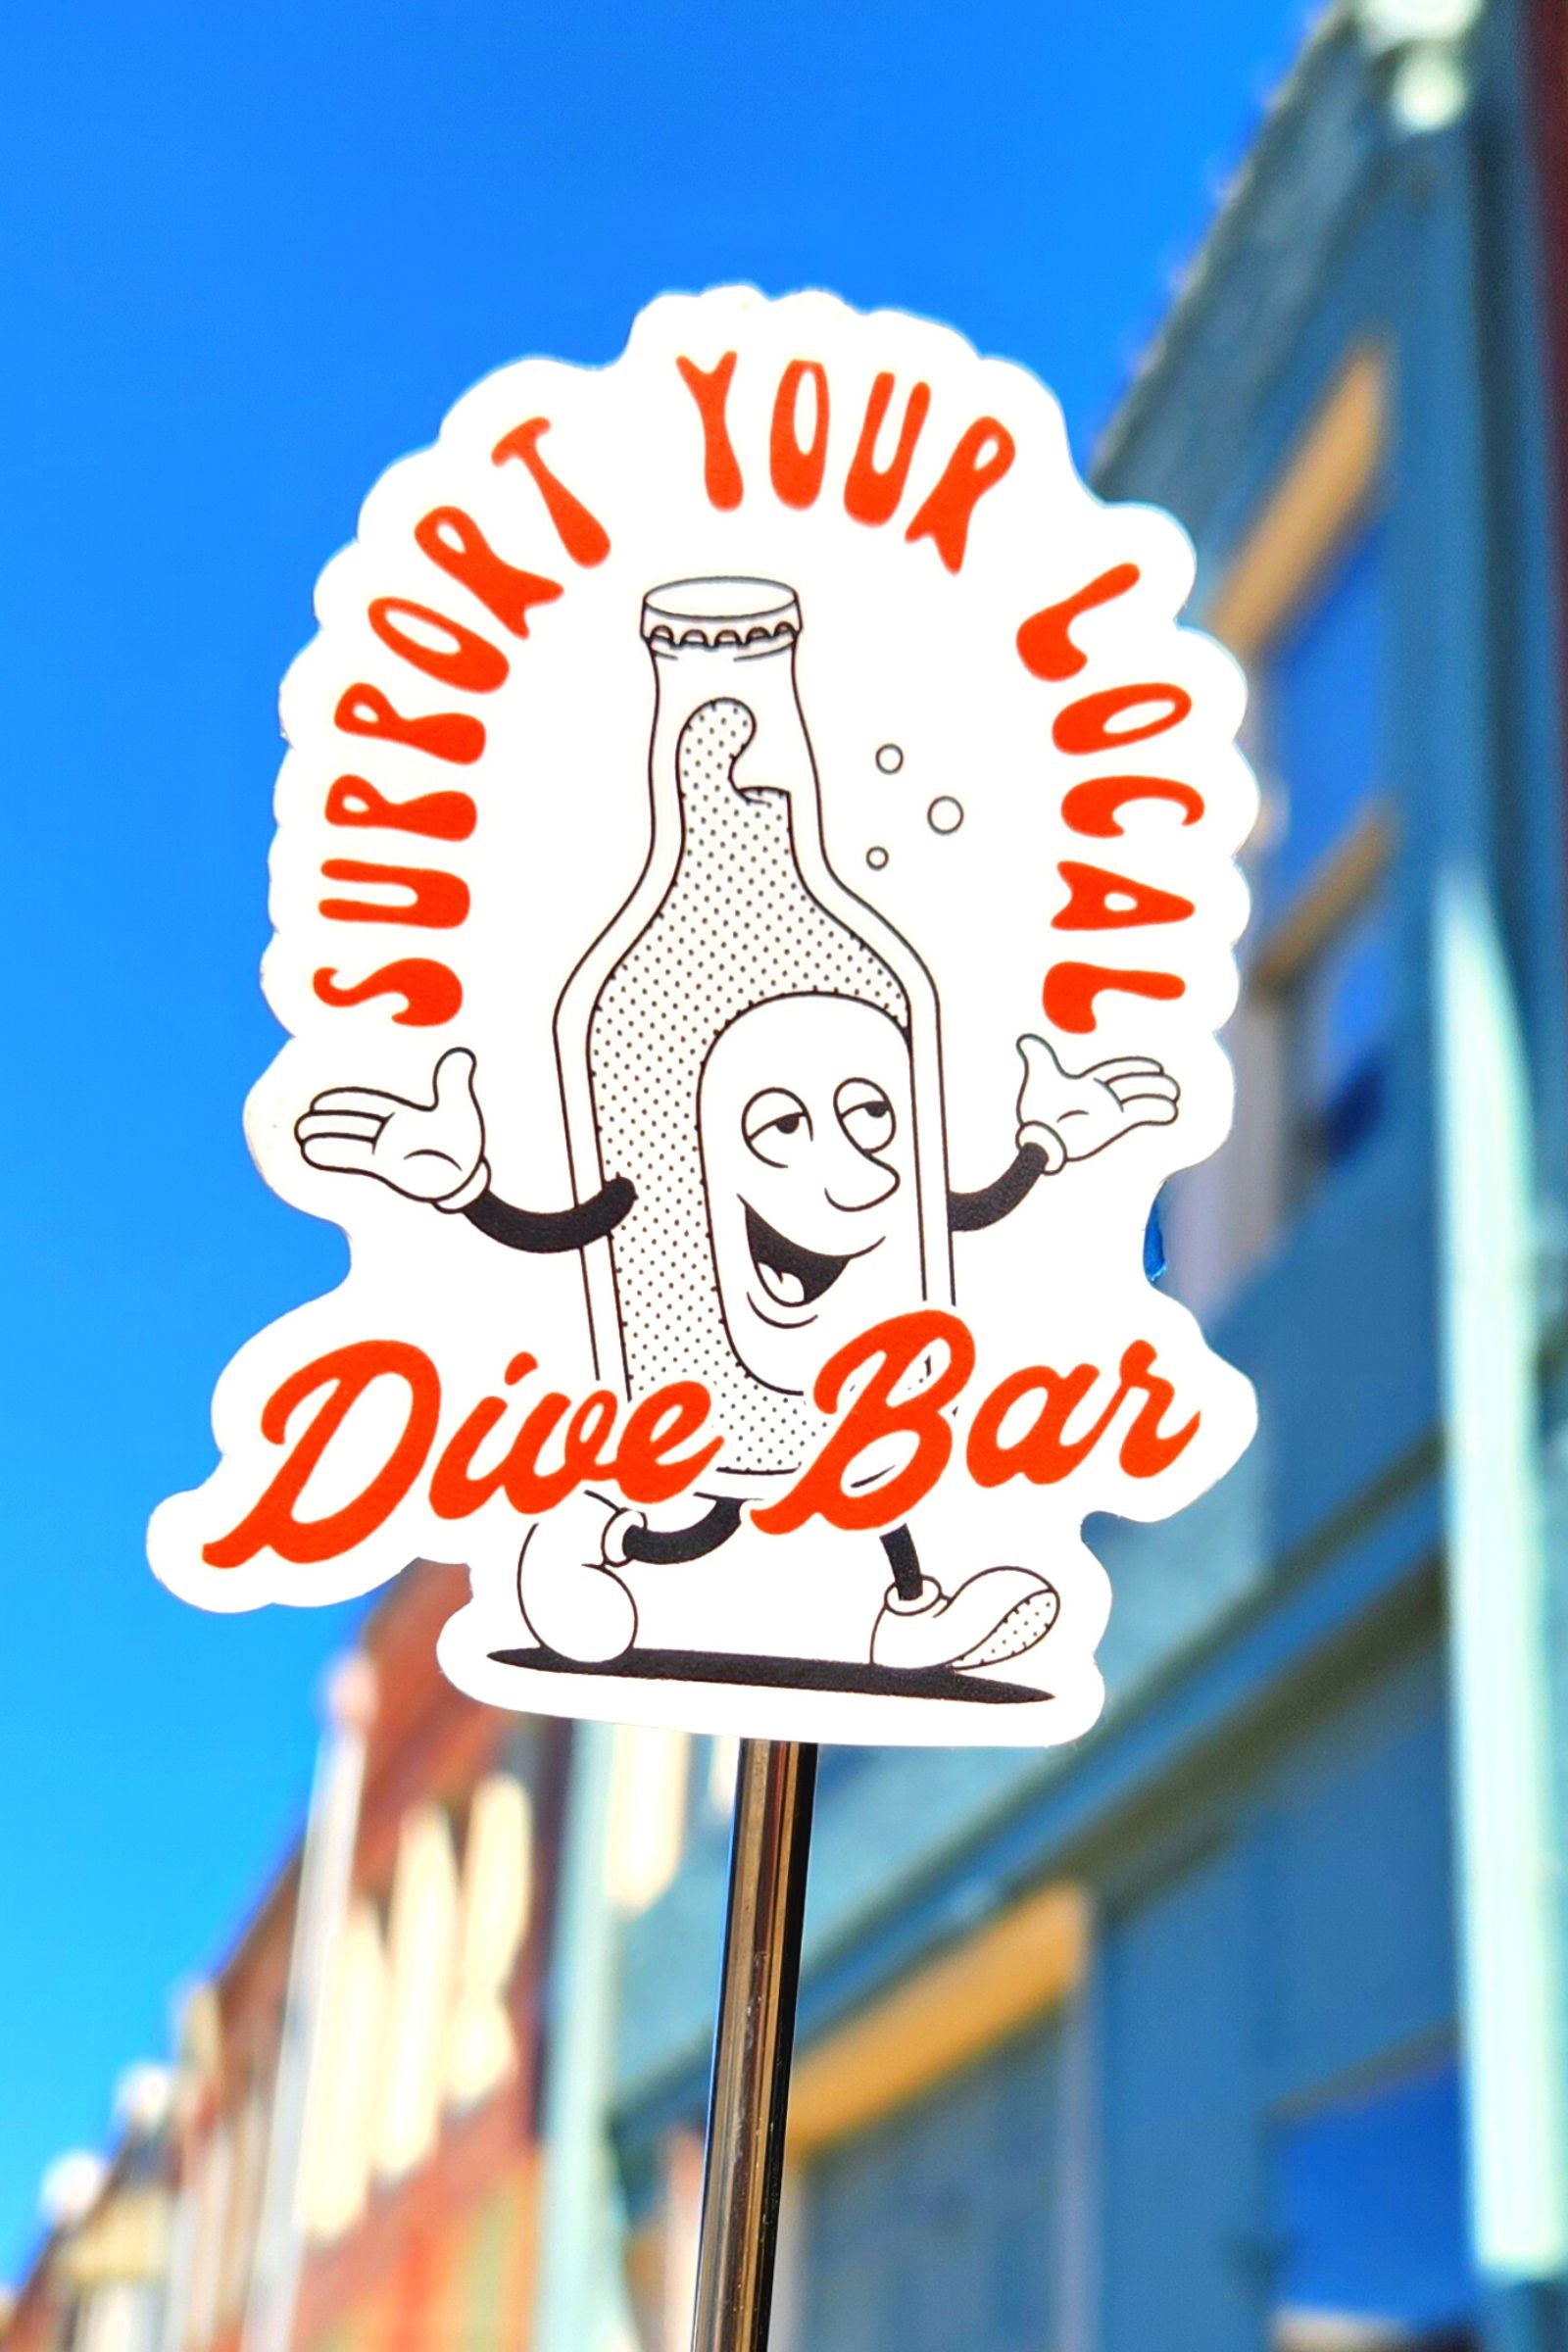 Support Your Local Dive Bar Sticker